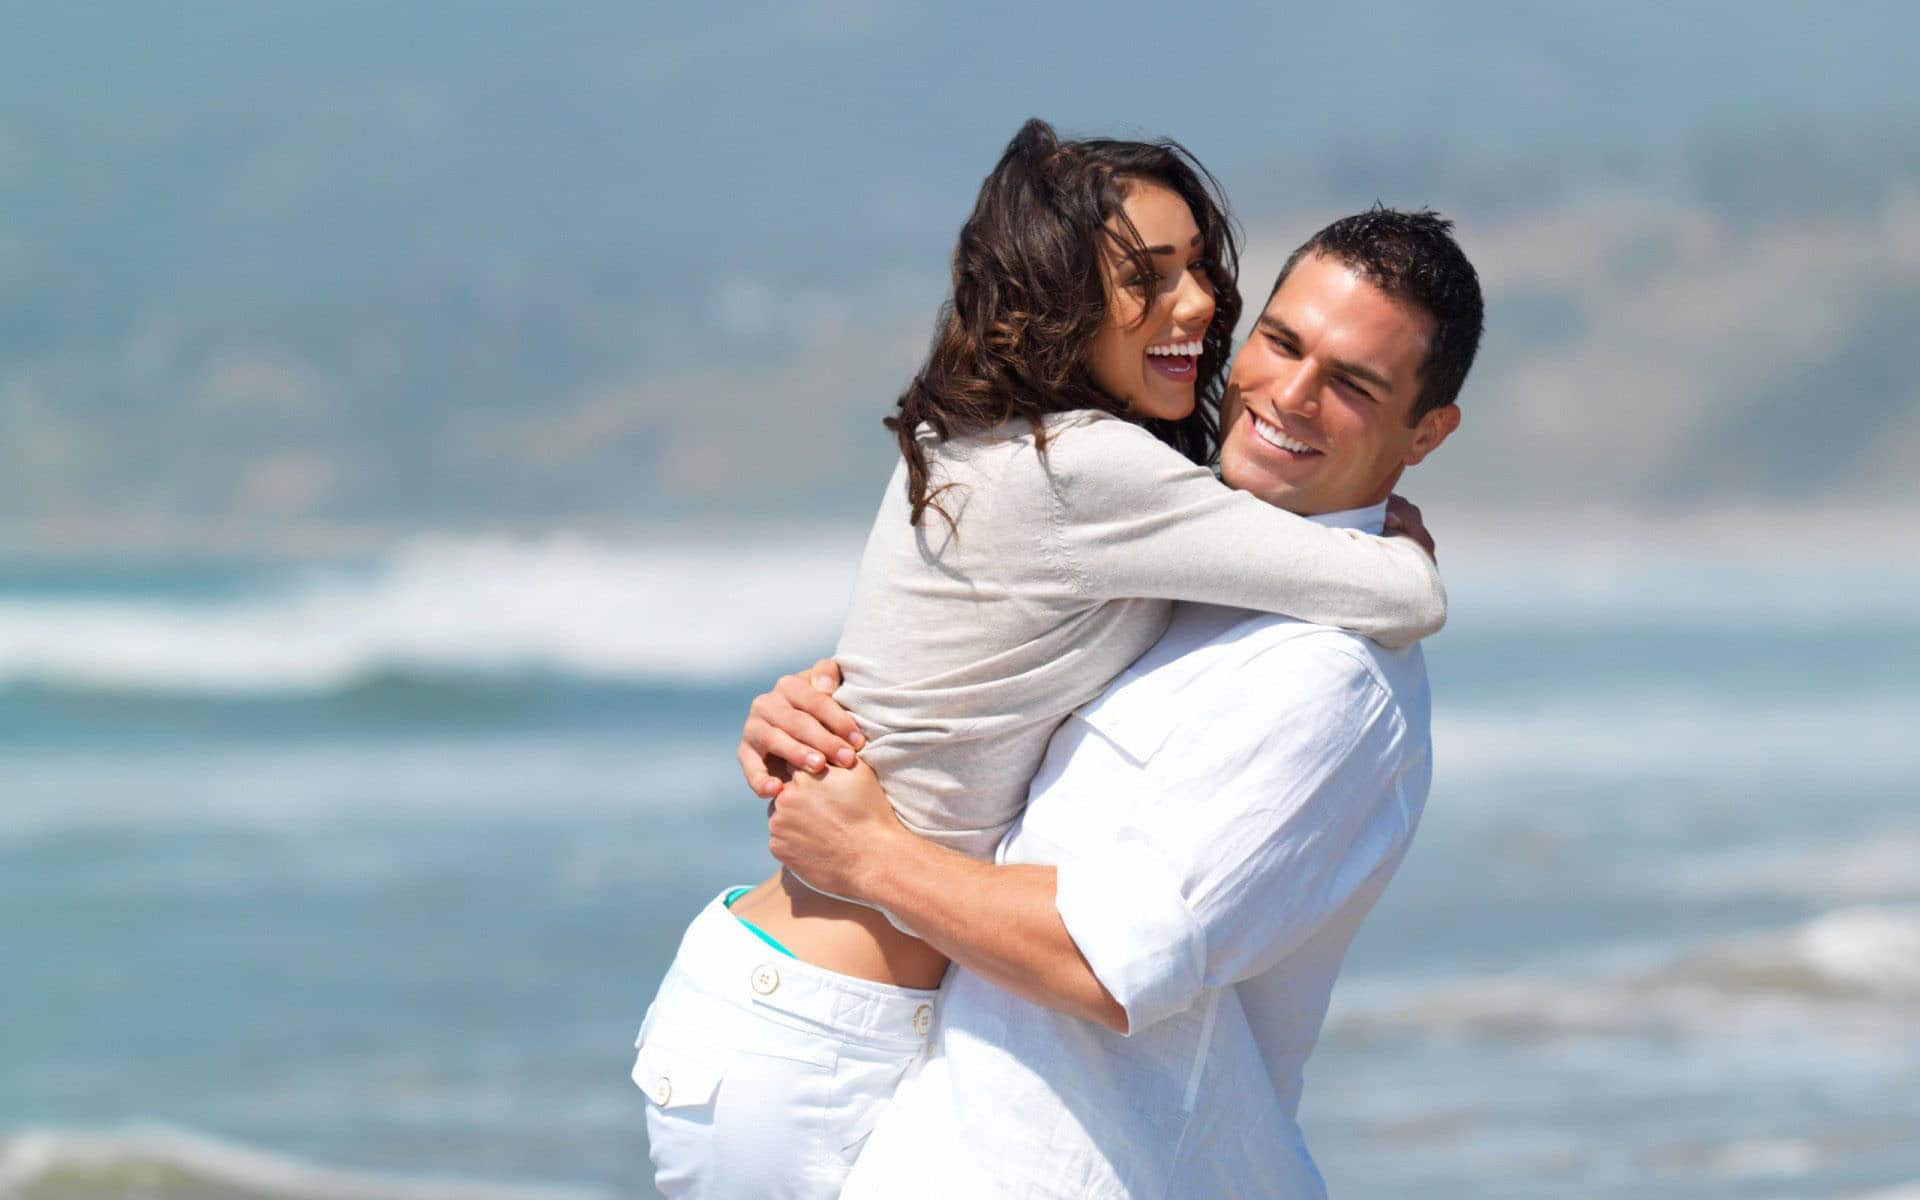 couple-looks-happy-showing-aqffection-on-the-beach